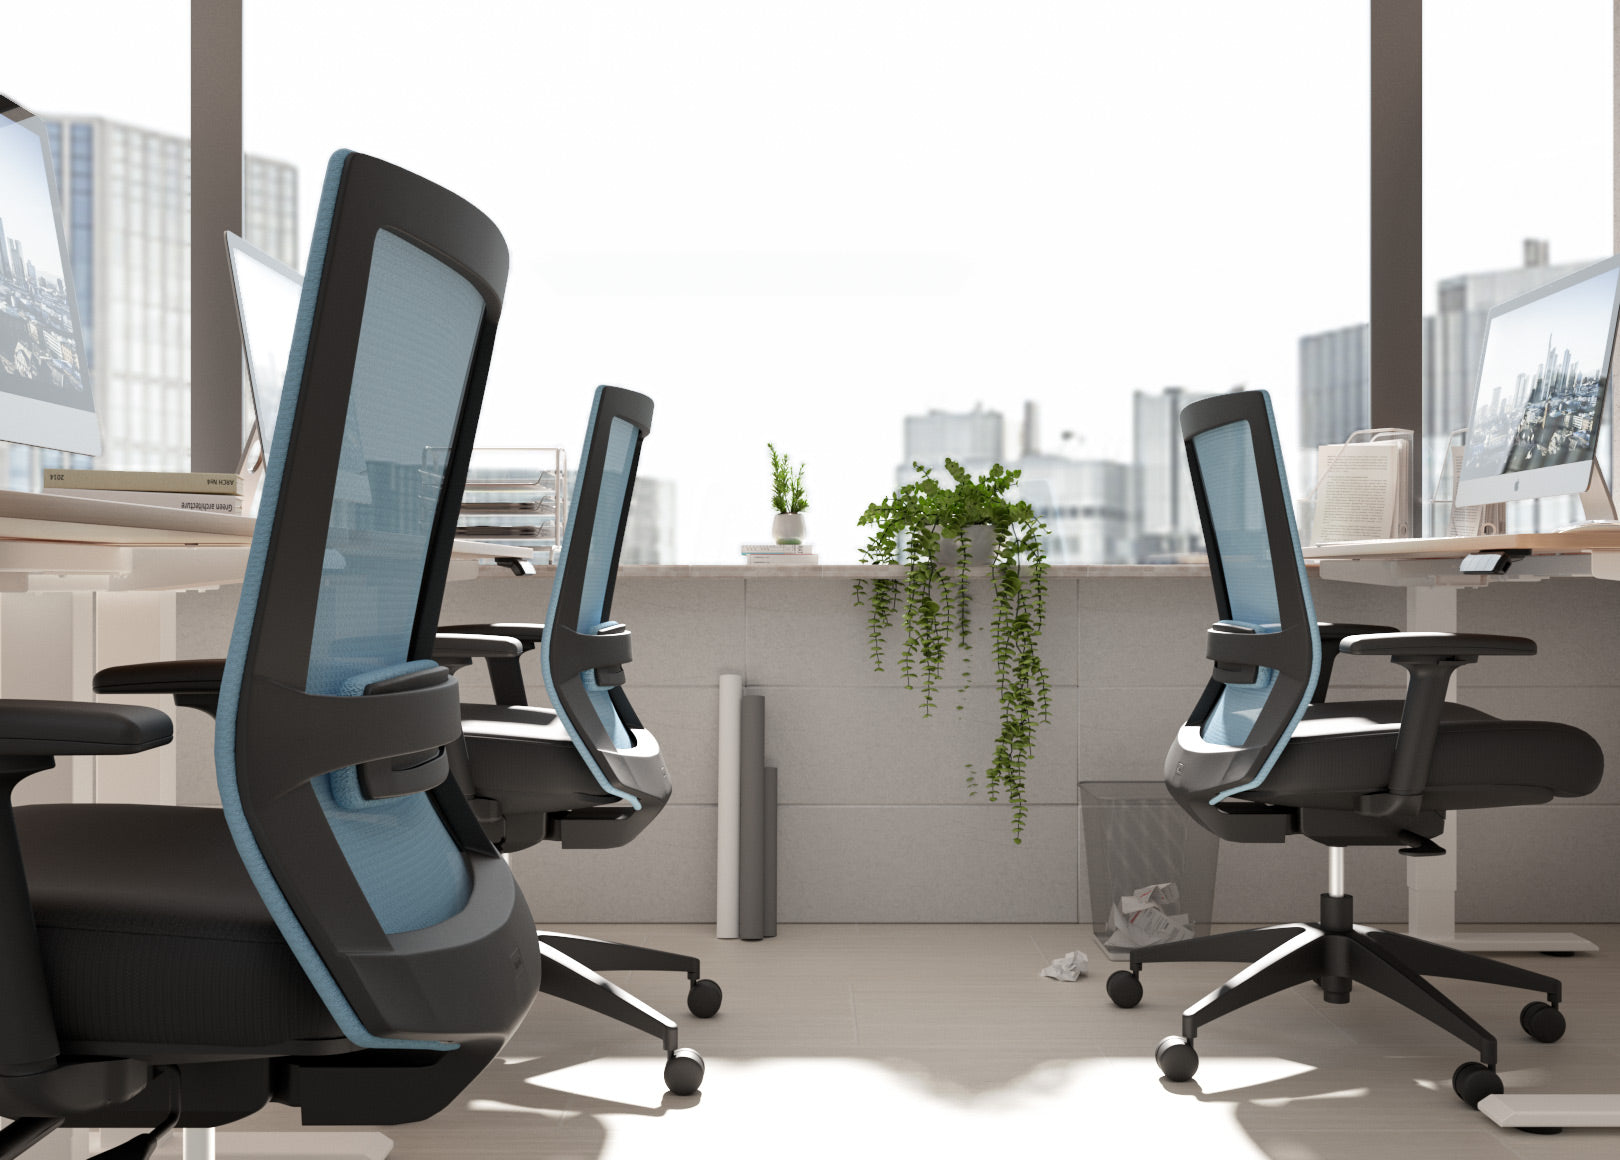 Sunaofe Elite67 ergonomic chair with adjustable features for improved posture and comfort in the workplace